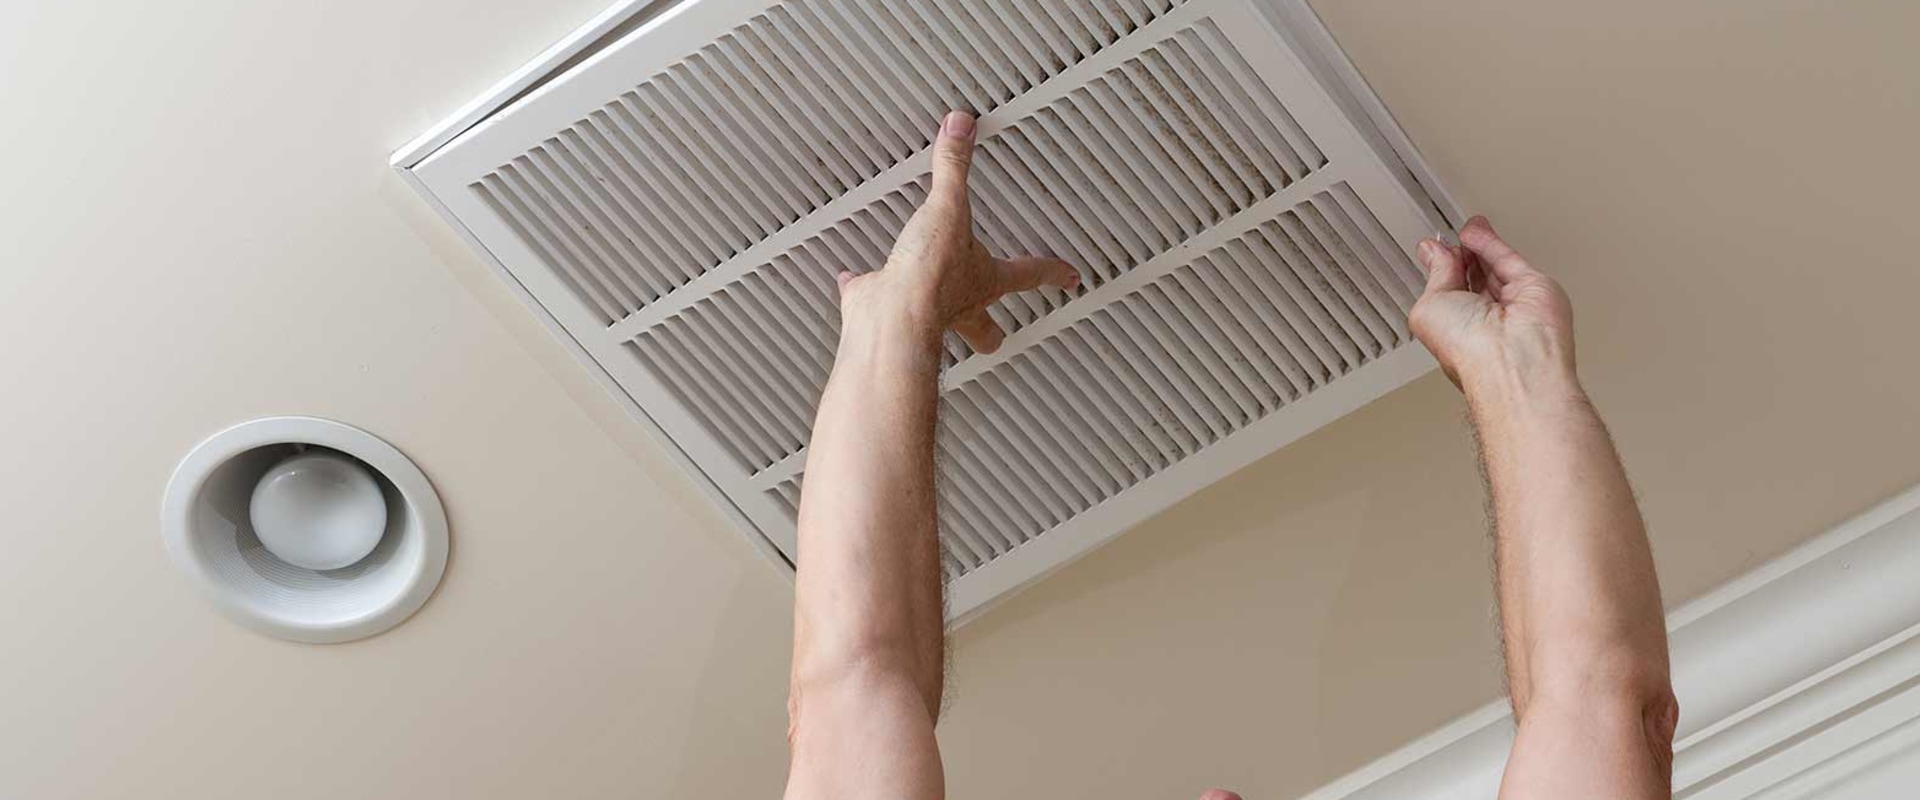 Can You Clean an Air Filter Instead of Replacing It? - An Expert's Perspective